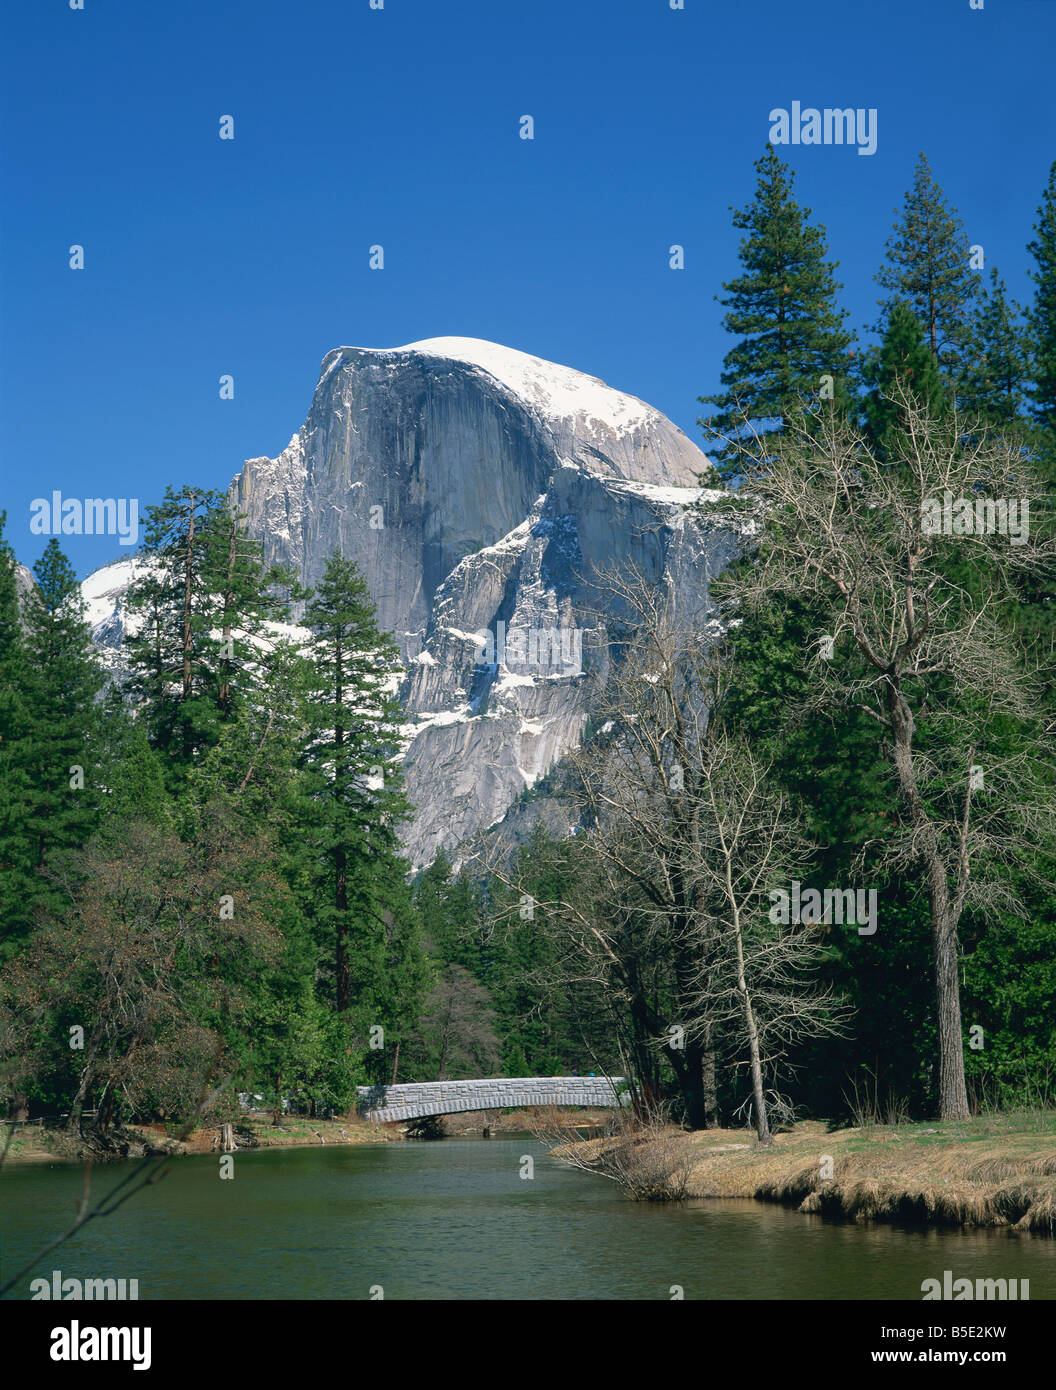 Trees beside a river frame the snow capped Half Dome mountain in Yosemite National Park California USA R Rainford Stock Photo